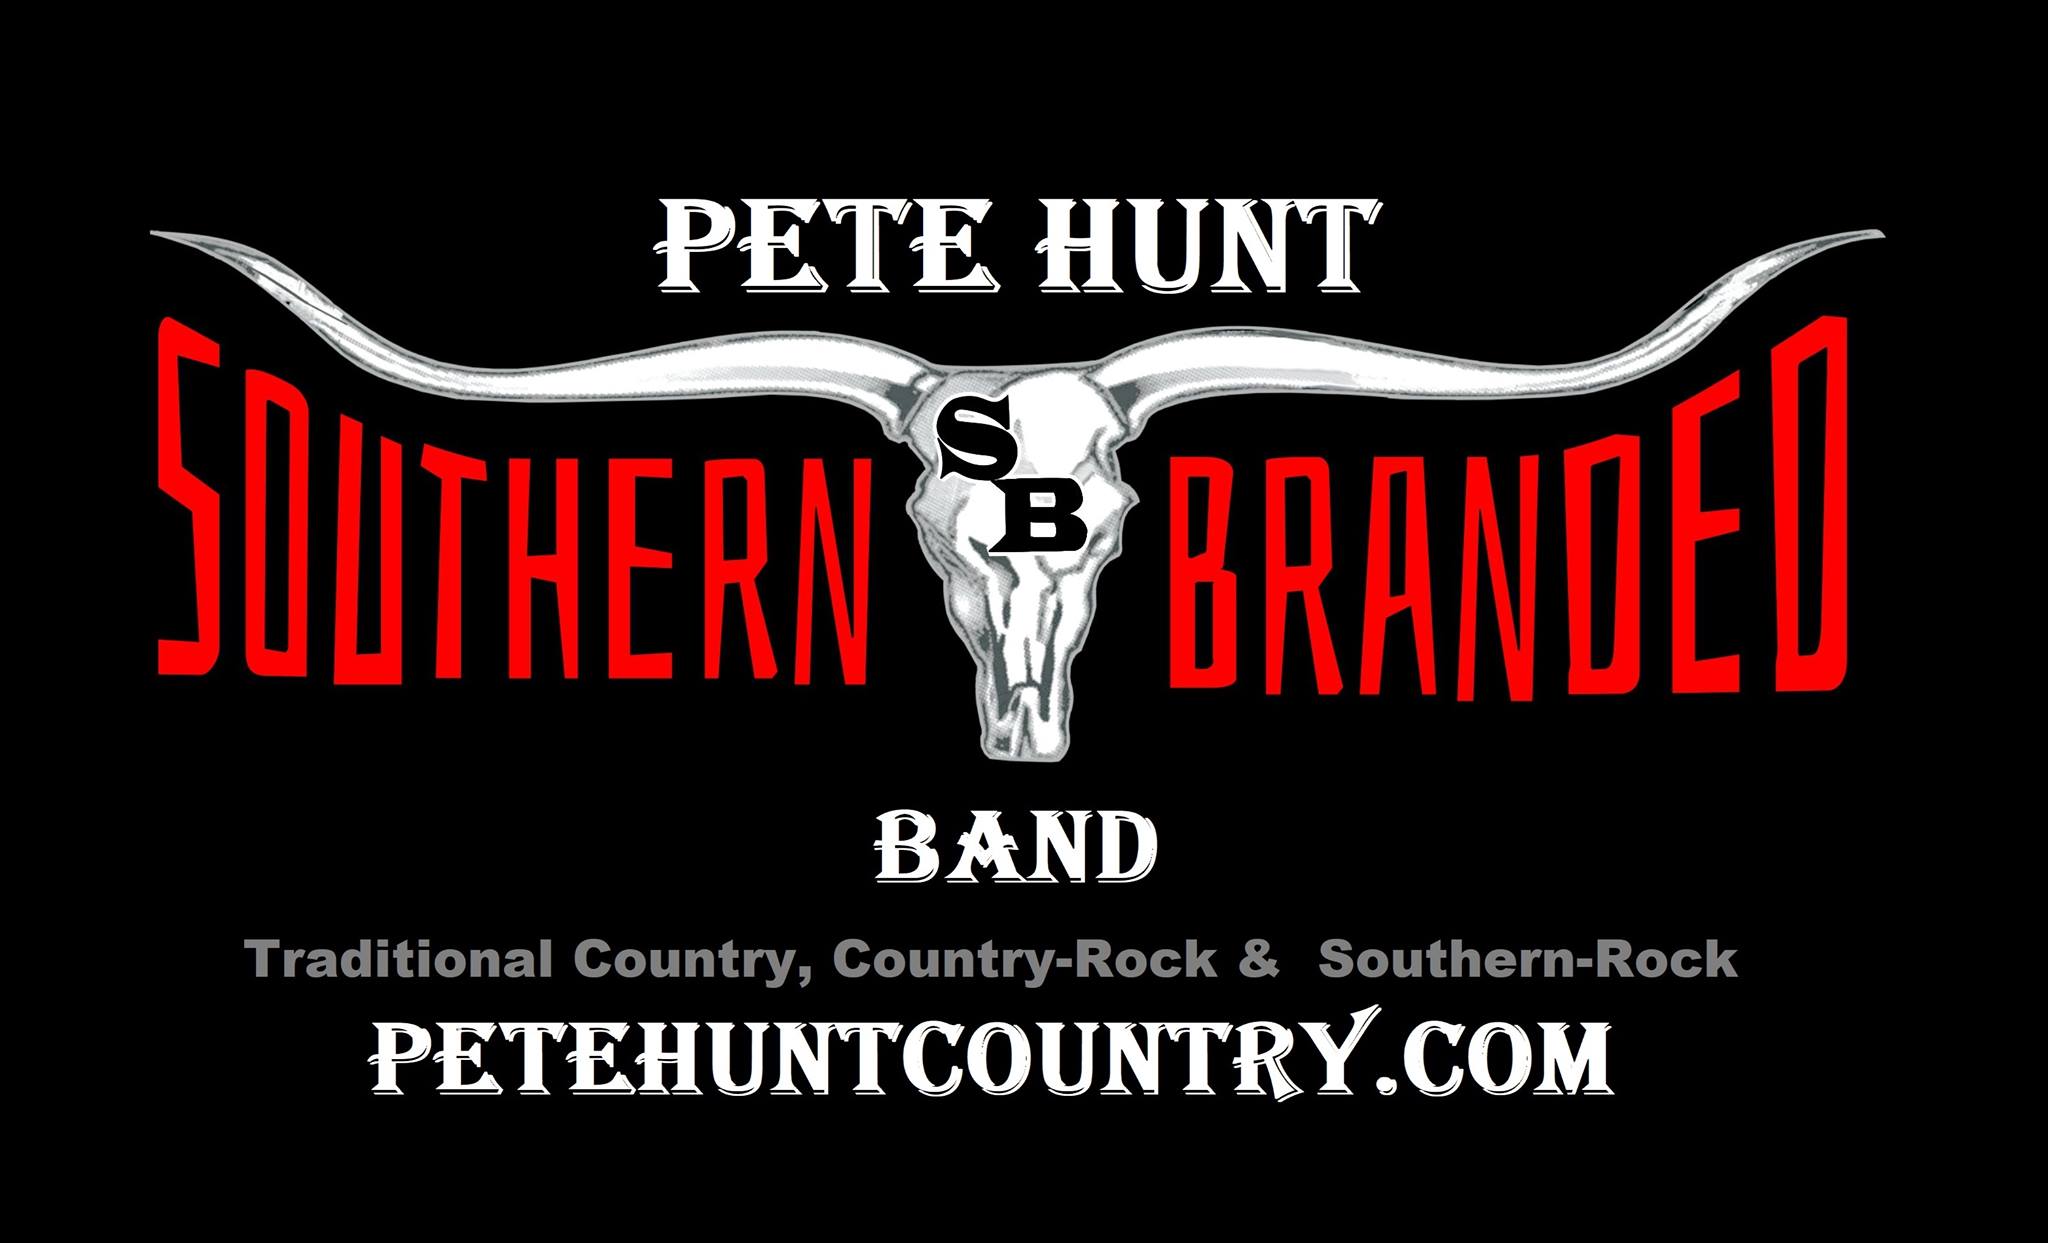 Pete Hunt Southern Branded Band Florida